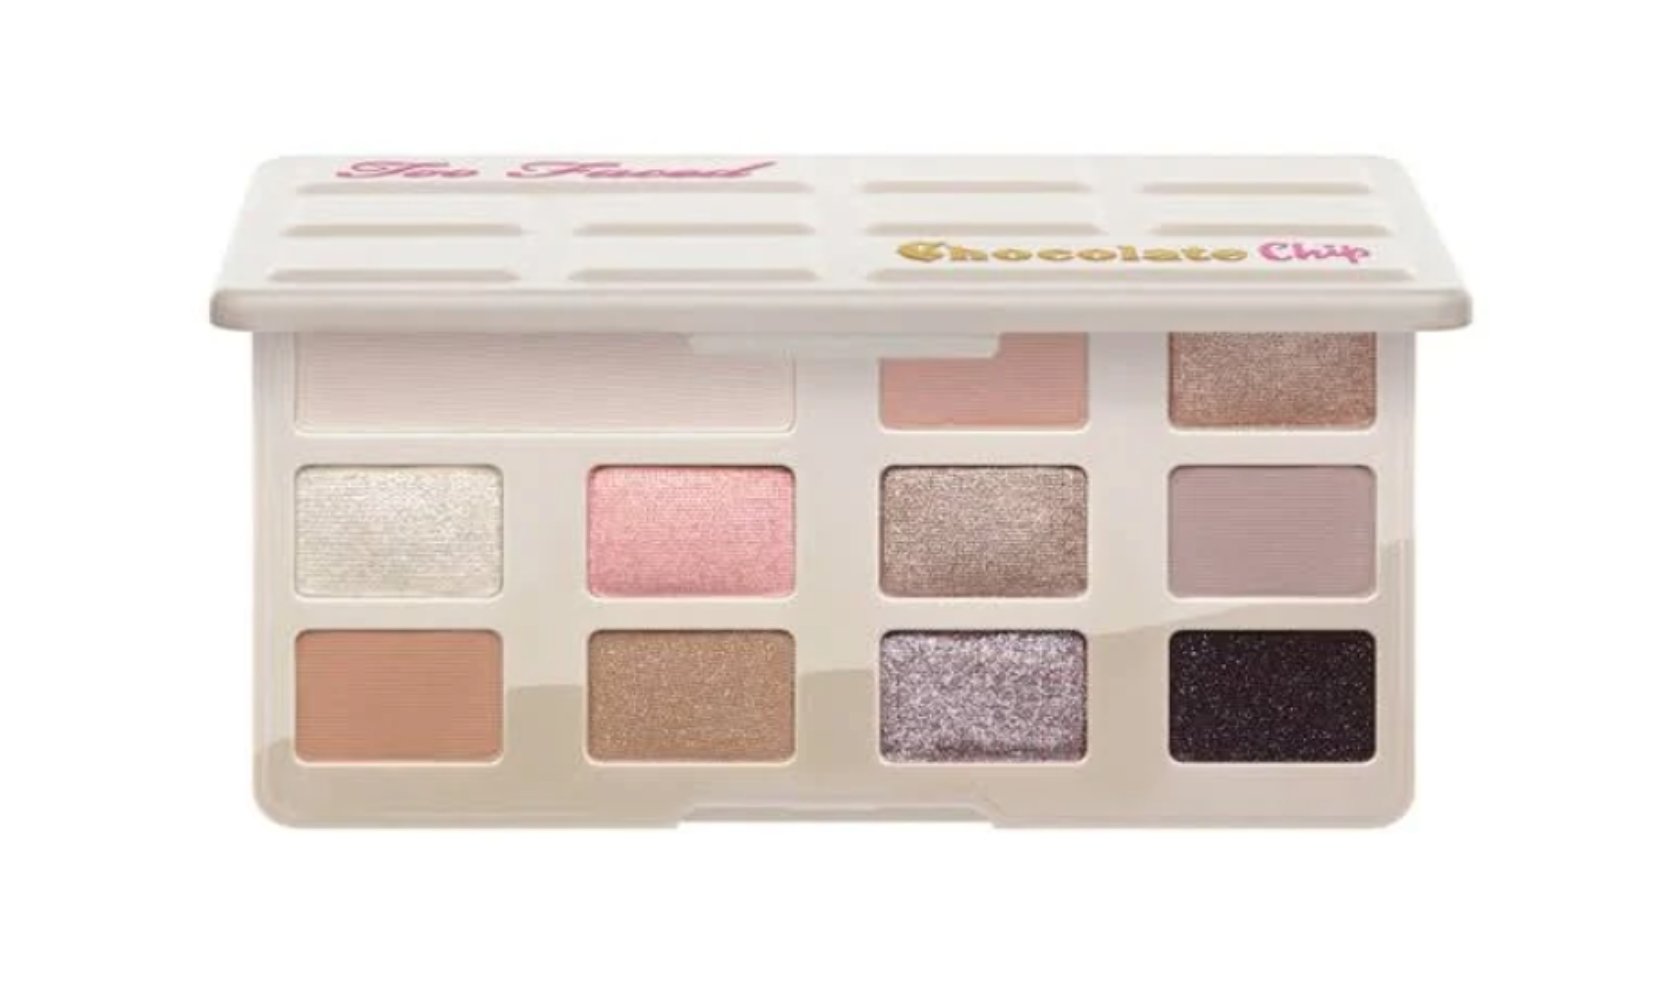 Too Faced Limited Edition White Chocolate Chip Palette - The Face Method